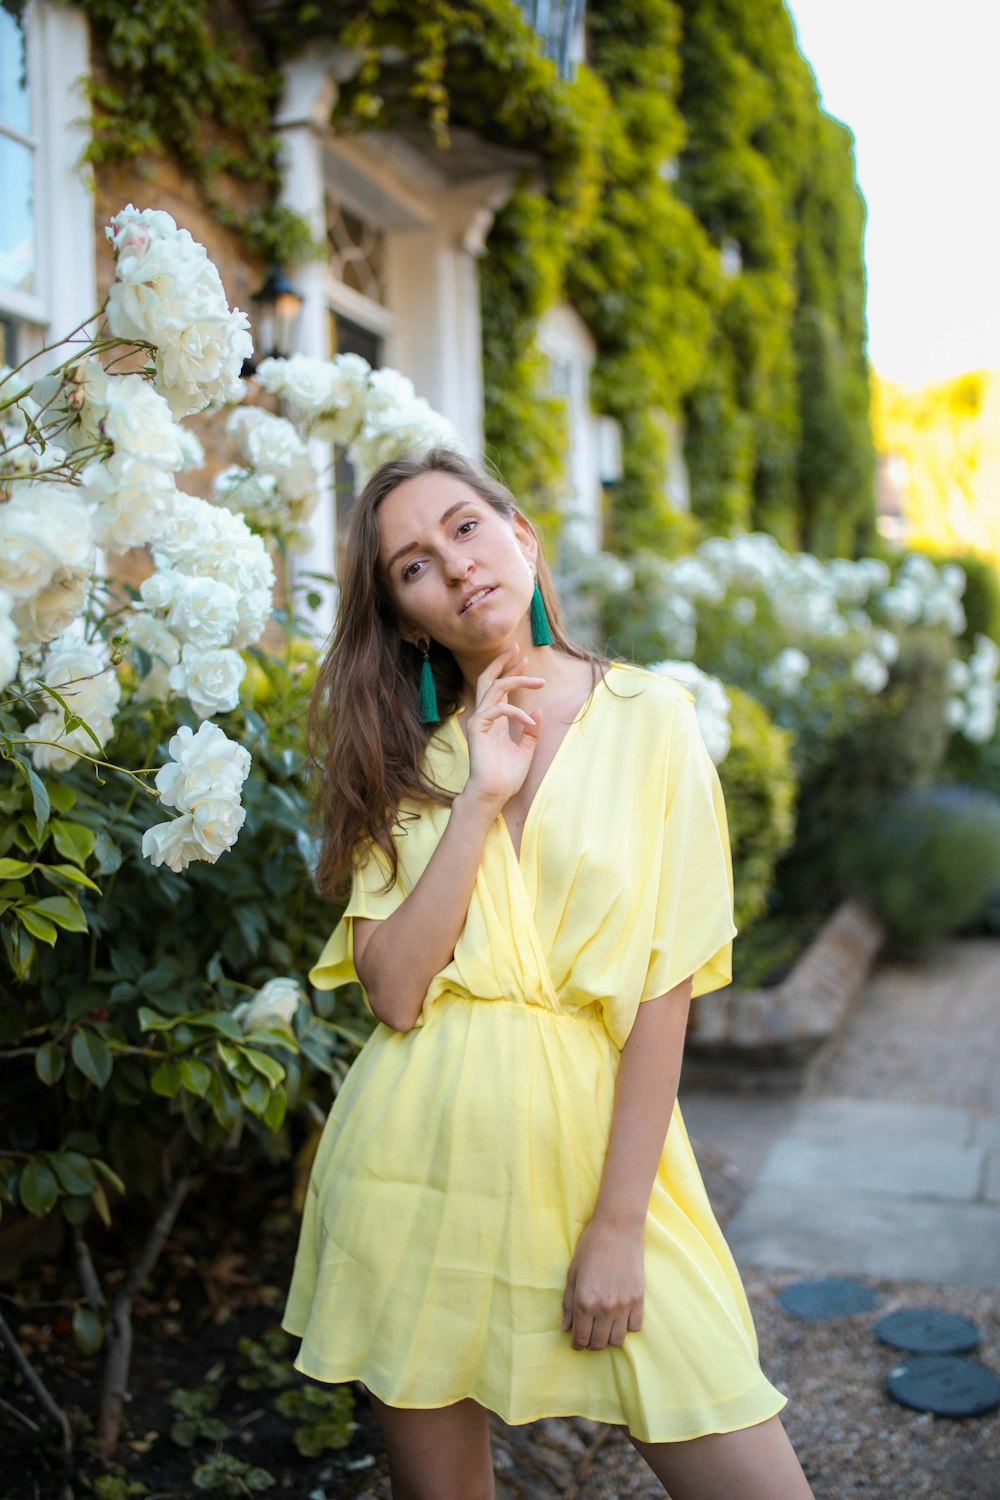 woman in yellow dress standing beside white flowers during daytime